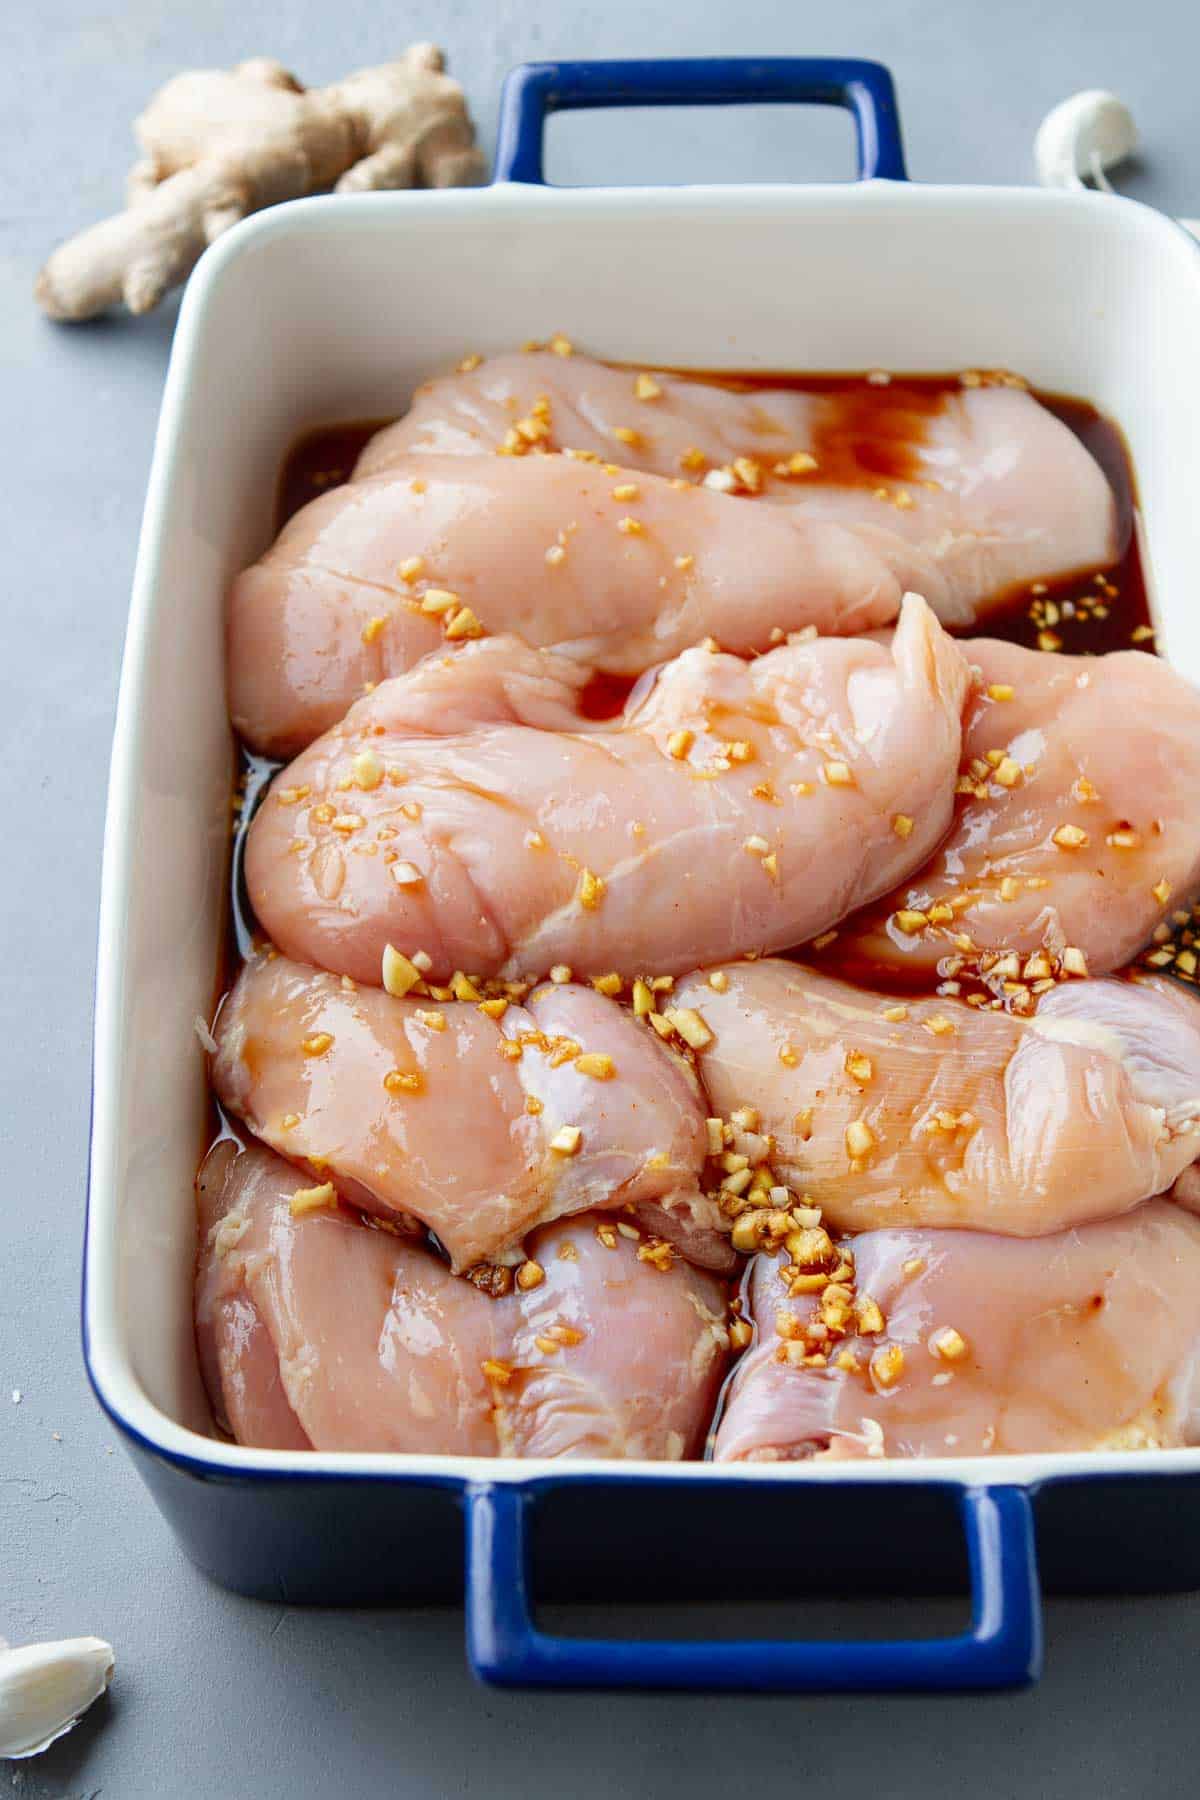 With just a whisk and a few basic ingredients, you can create a delicious honey soy chicken marinade, adding fantastic flavor to your favorite chicken dishes.